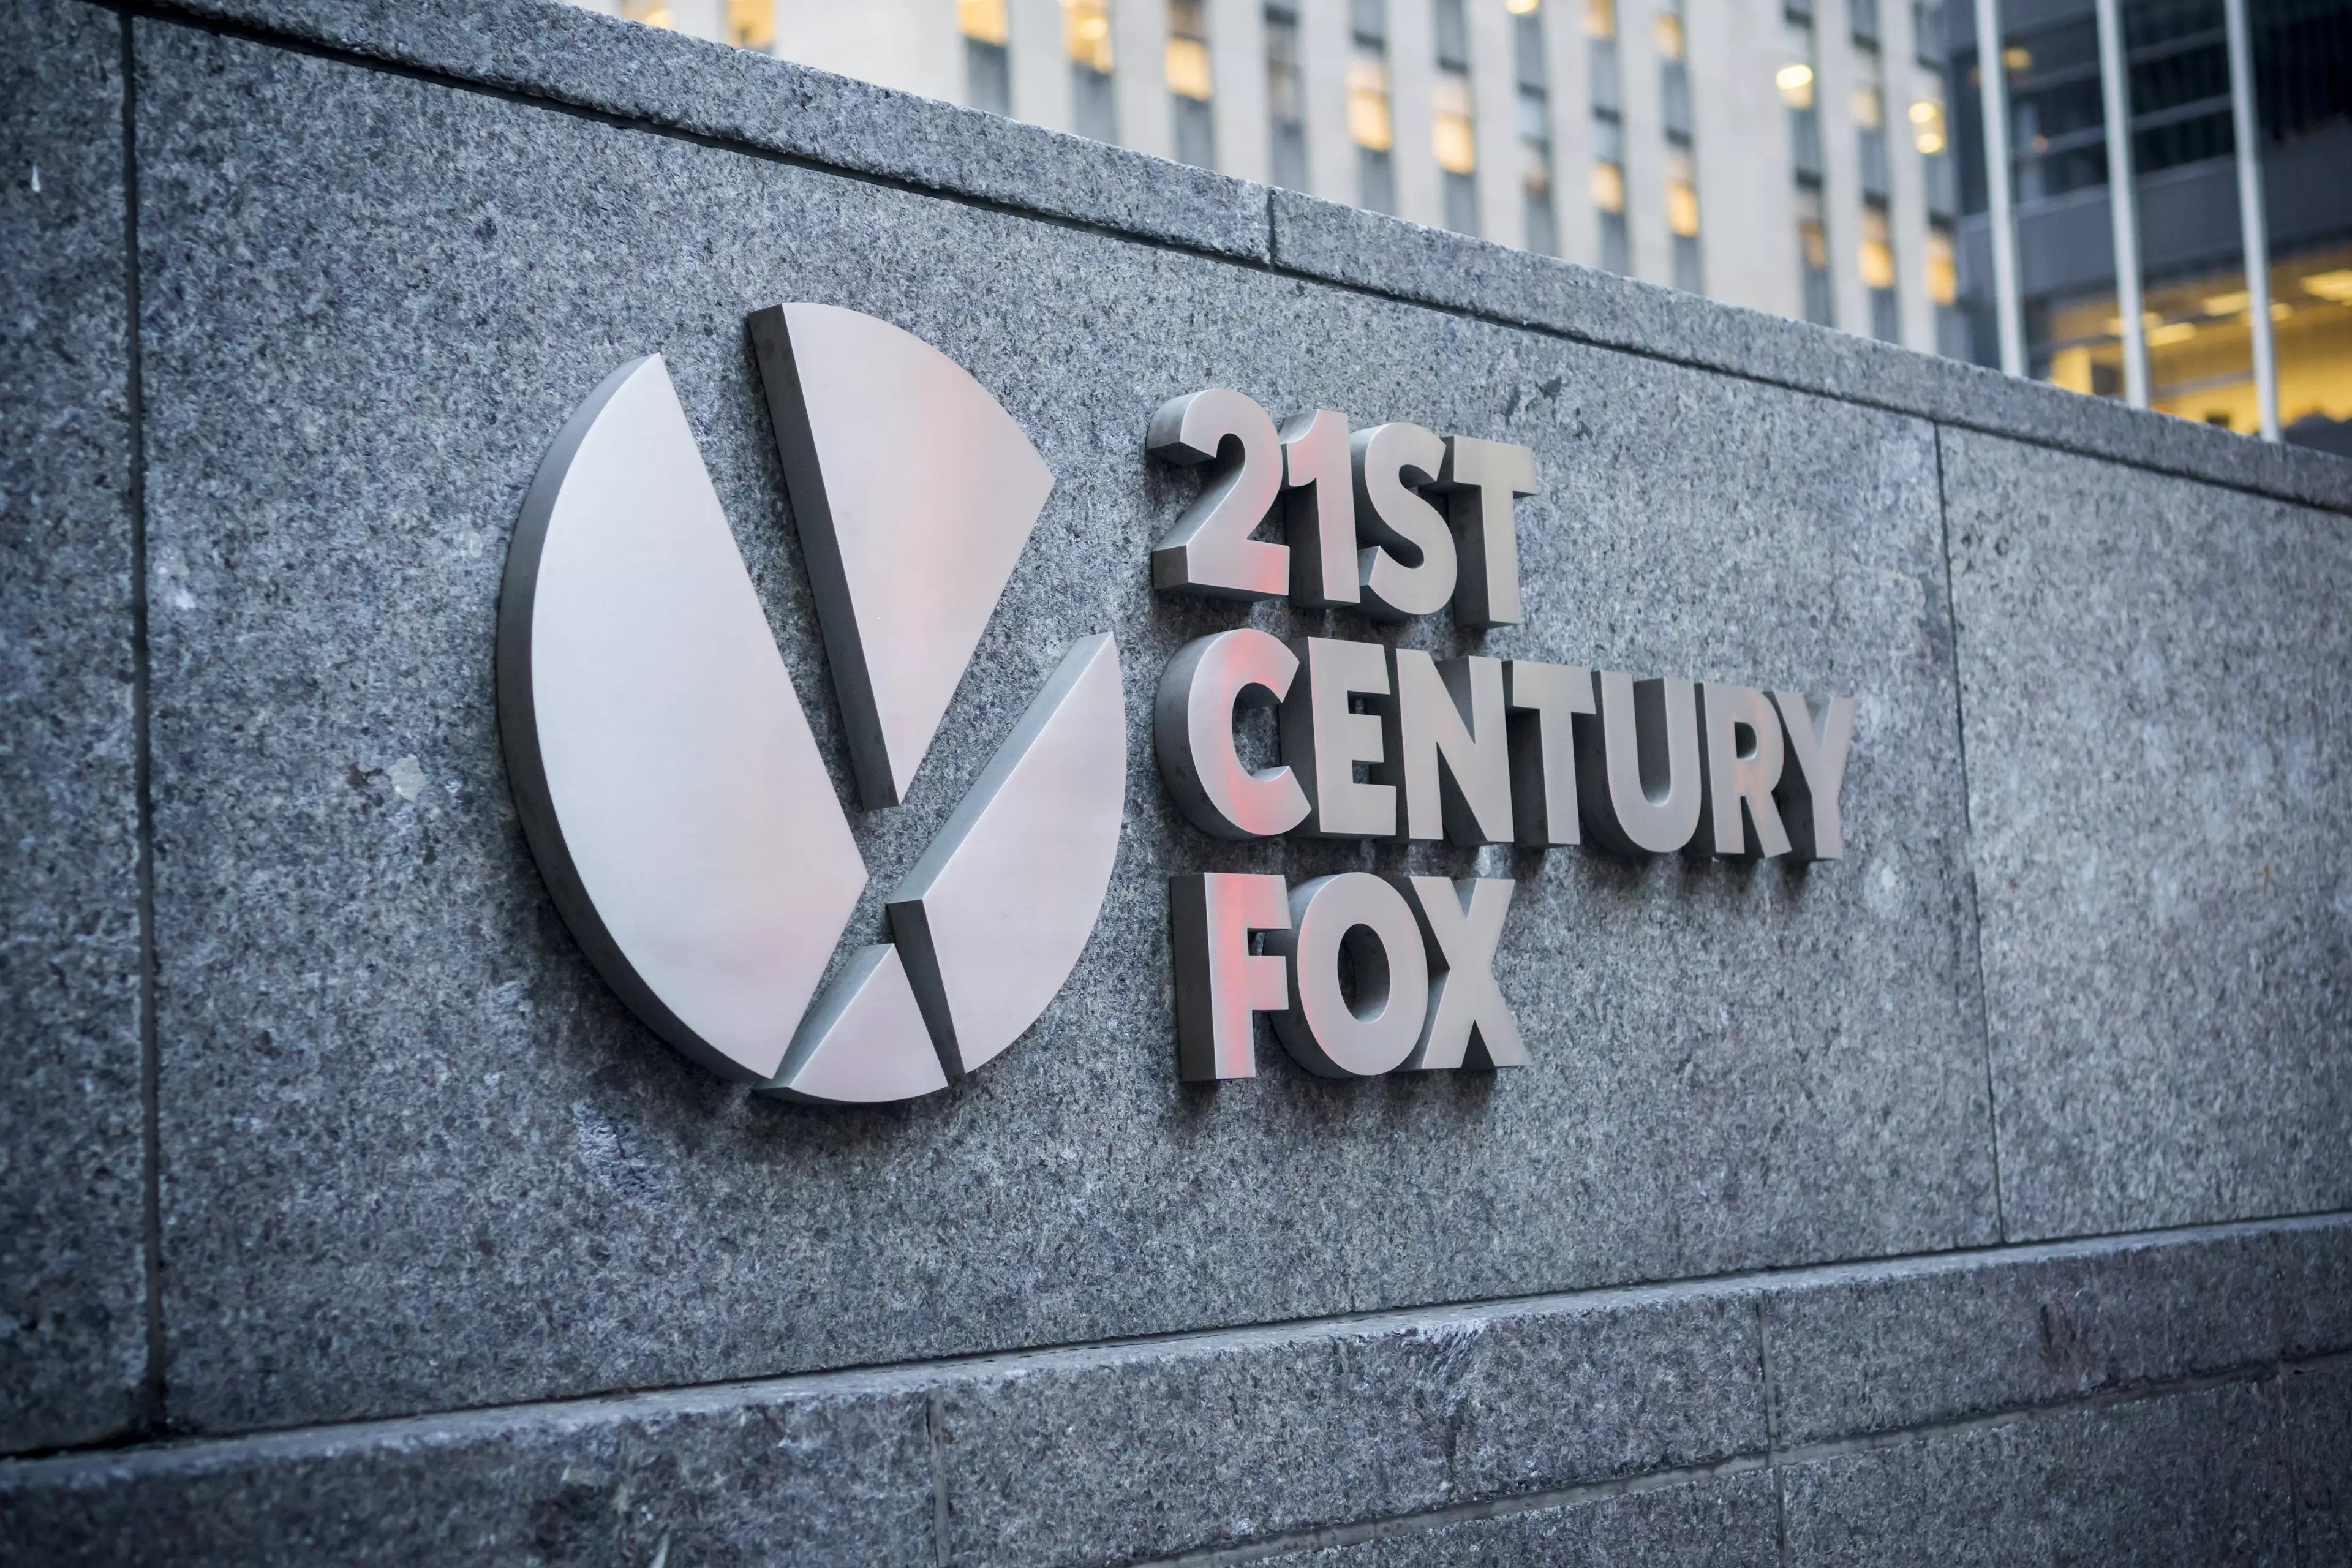 Fox was bought out by Disney last year.